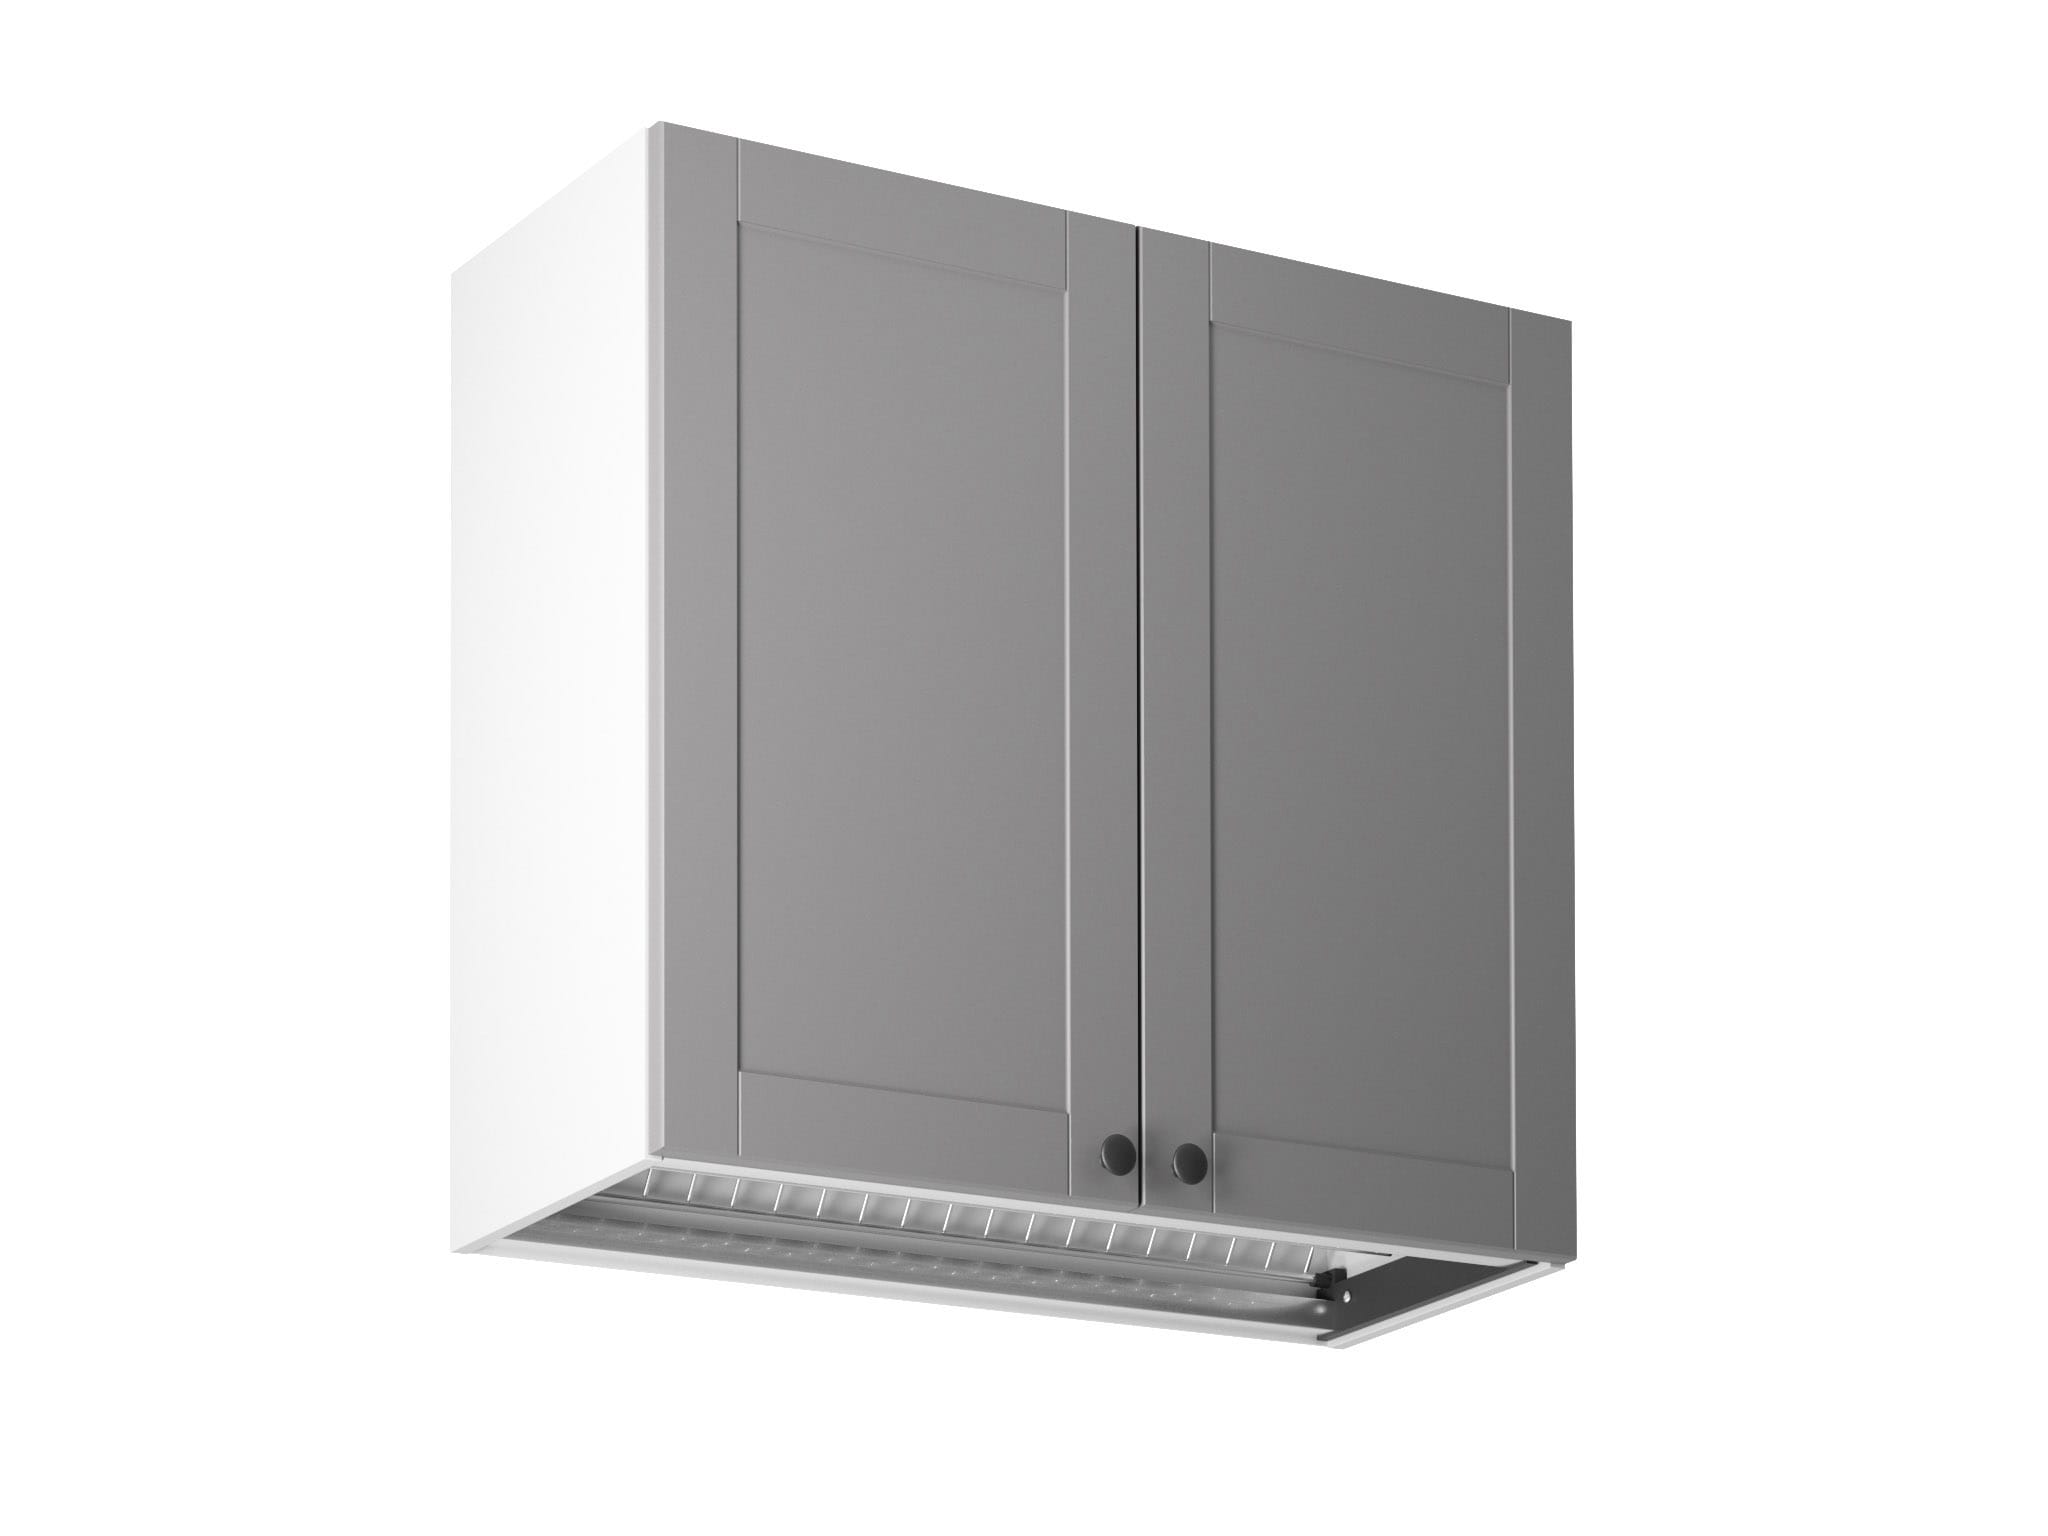 TWO-DOOR KITCHEN WALL CABINET FOR THE MODERN KITCHEN IN WHITE COLOUR G80